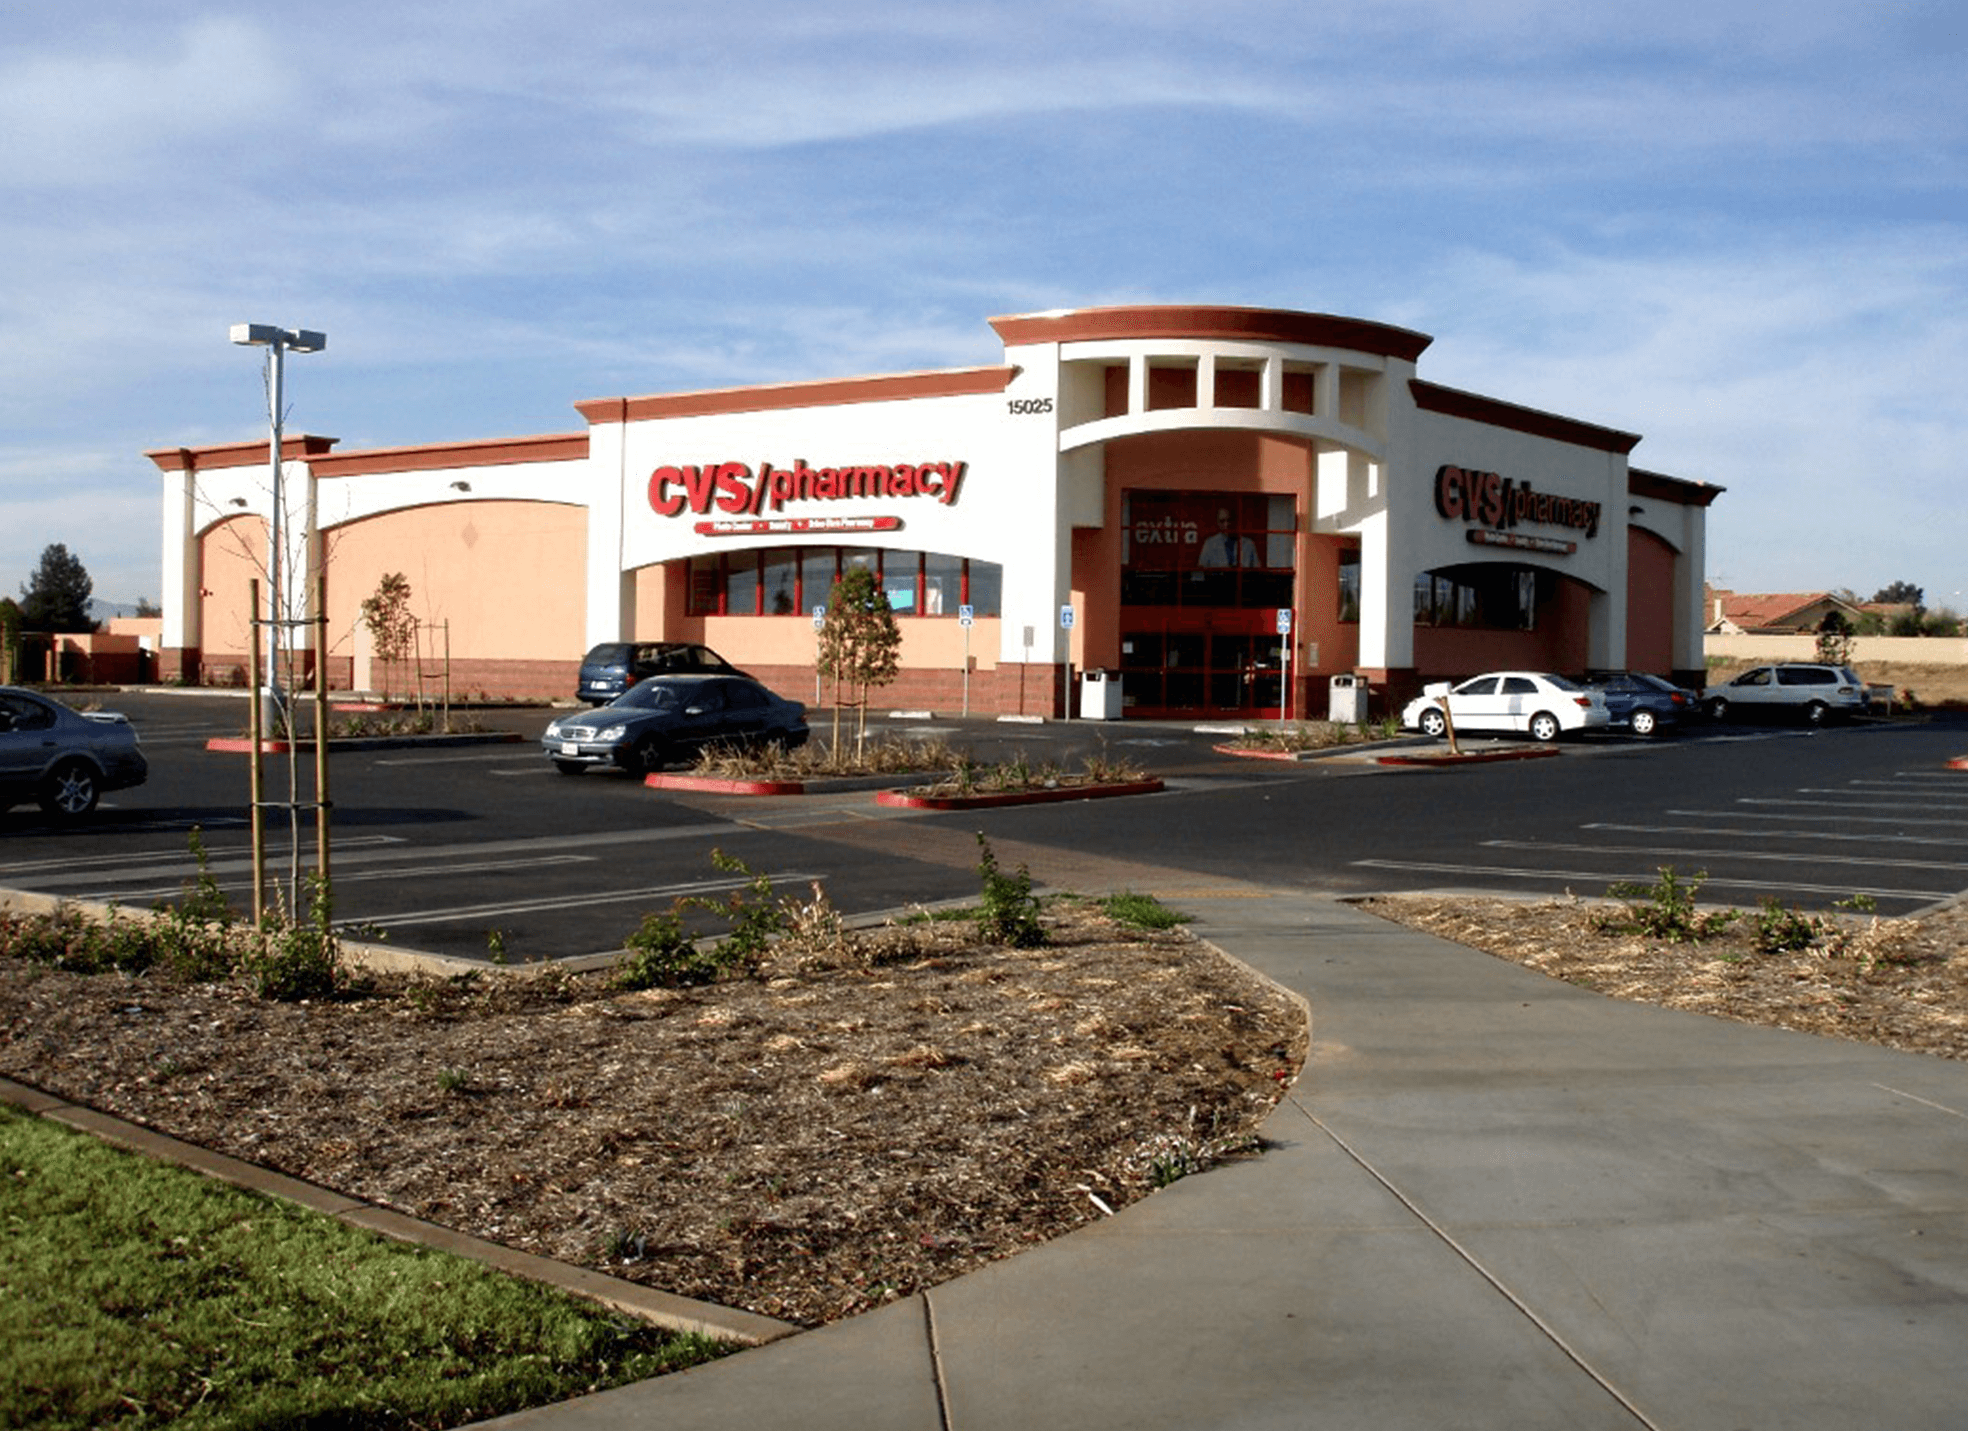 WestLAND's Group Stand-alone Retail Image of a CVS Pharmacy.